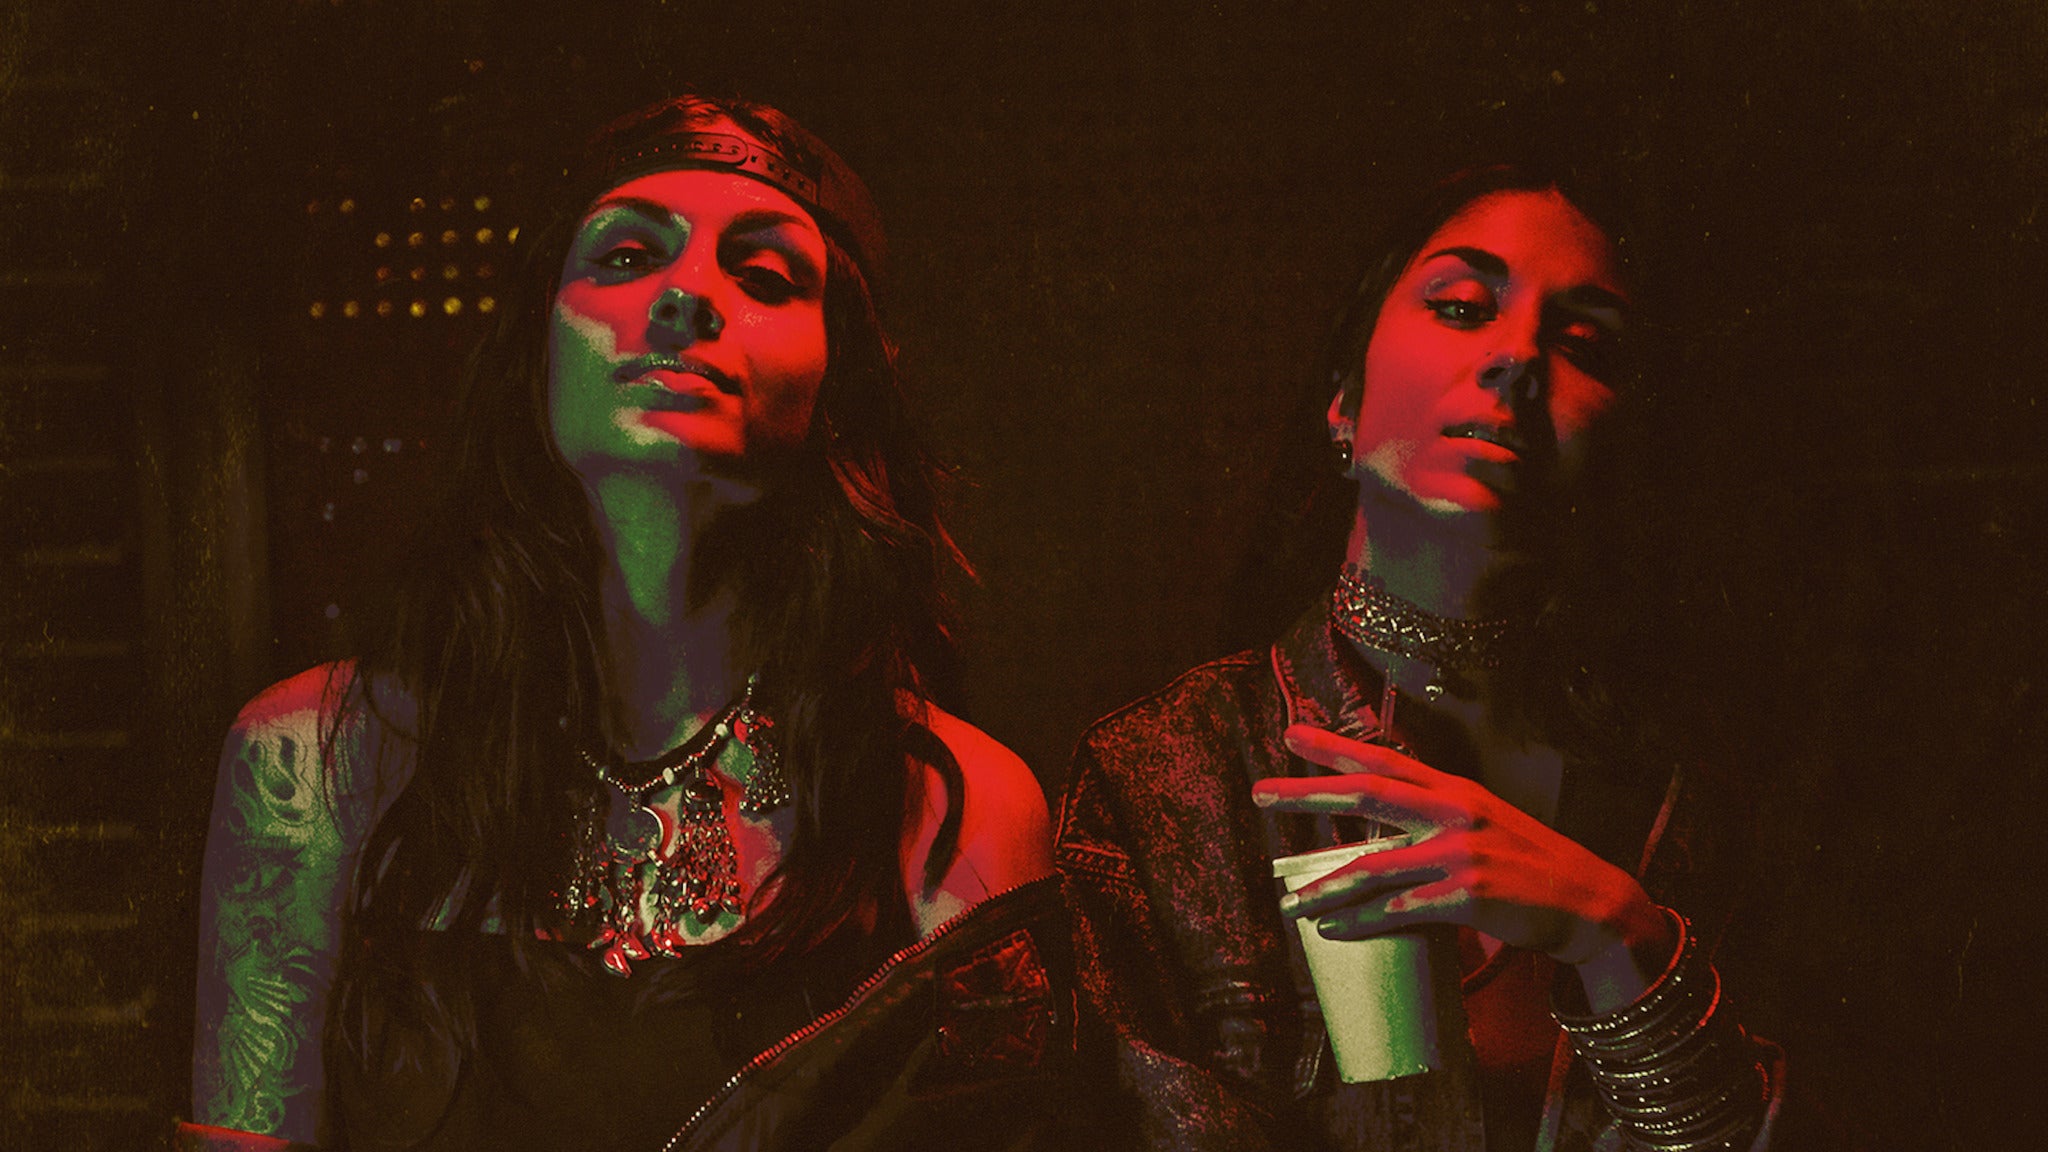 Krewella - New World Tour presented by SiriusXM BPM in Chicago promo photo for AT&T® Priority presale offer code